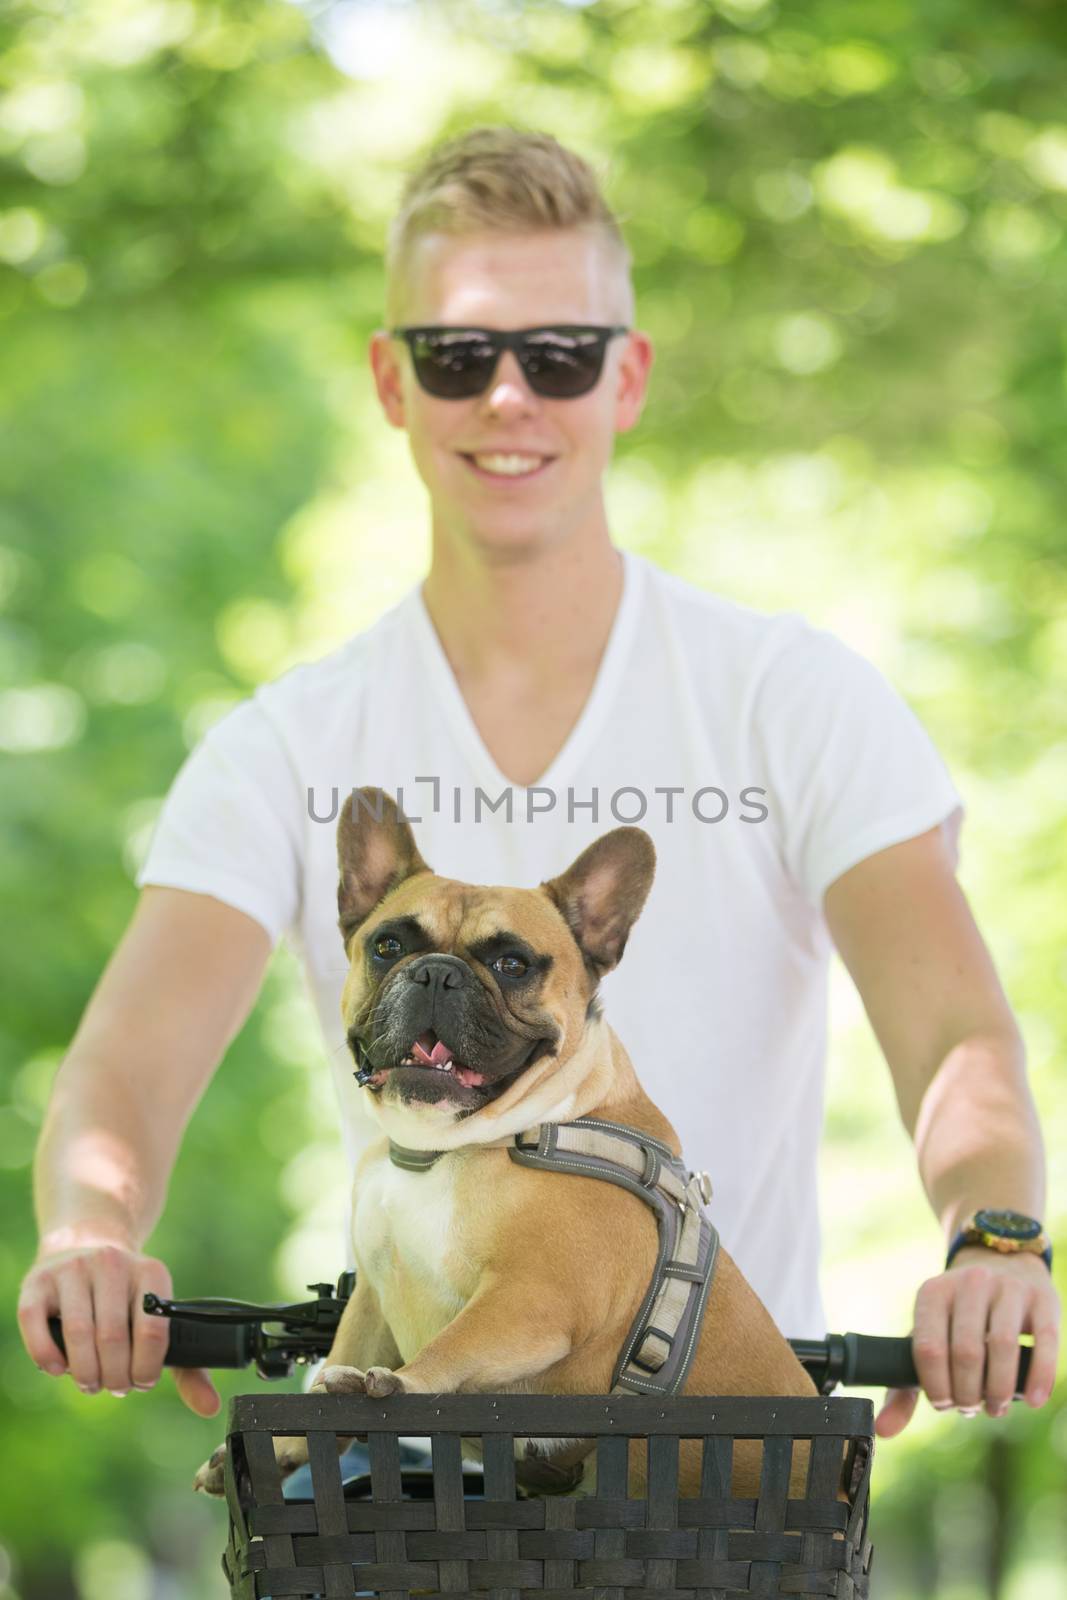 French bulldog dog enjoying riding in bycicle basket in city park by kasto